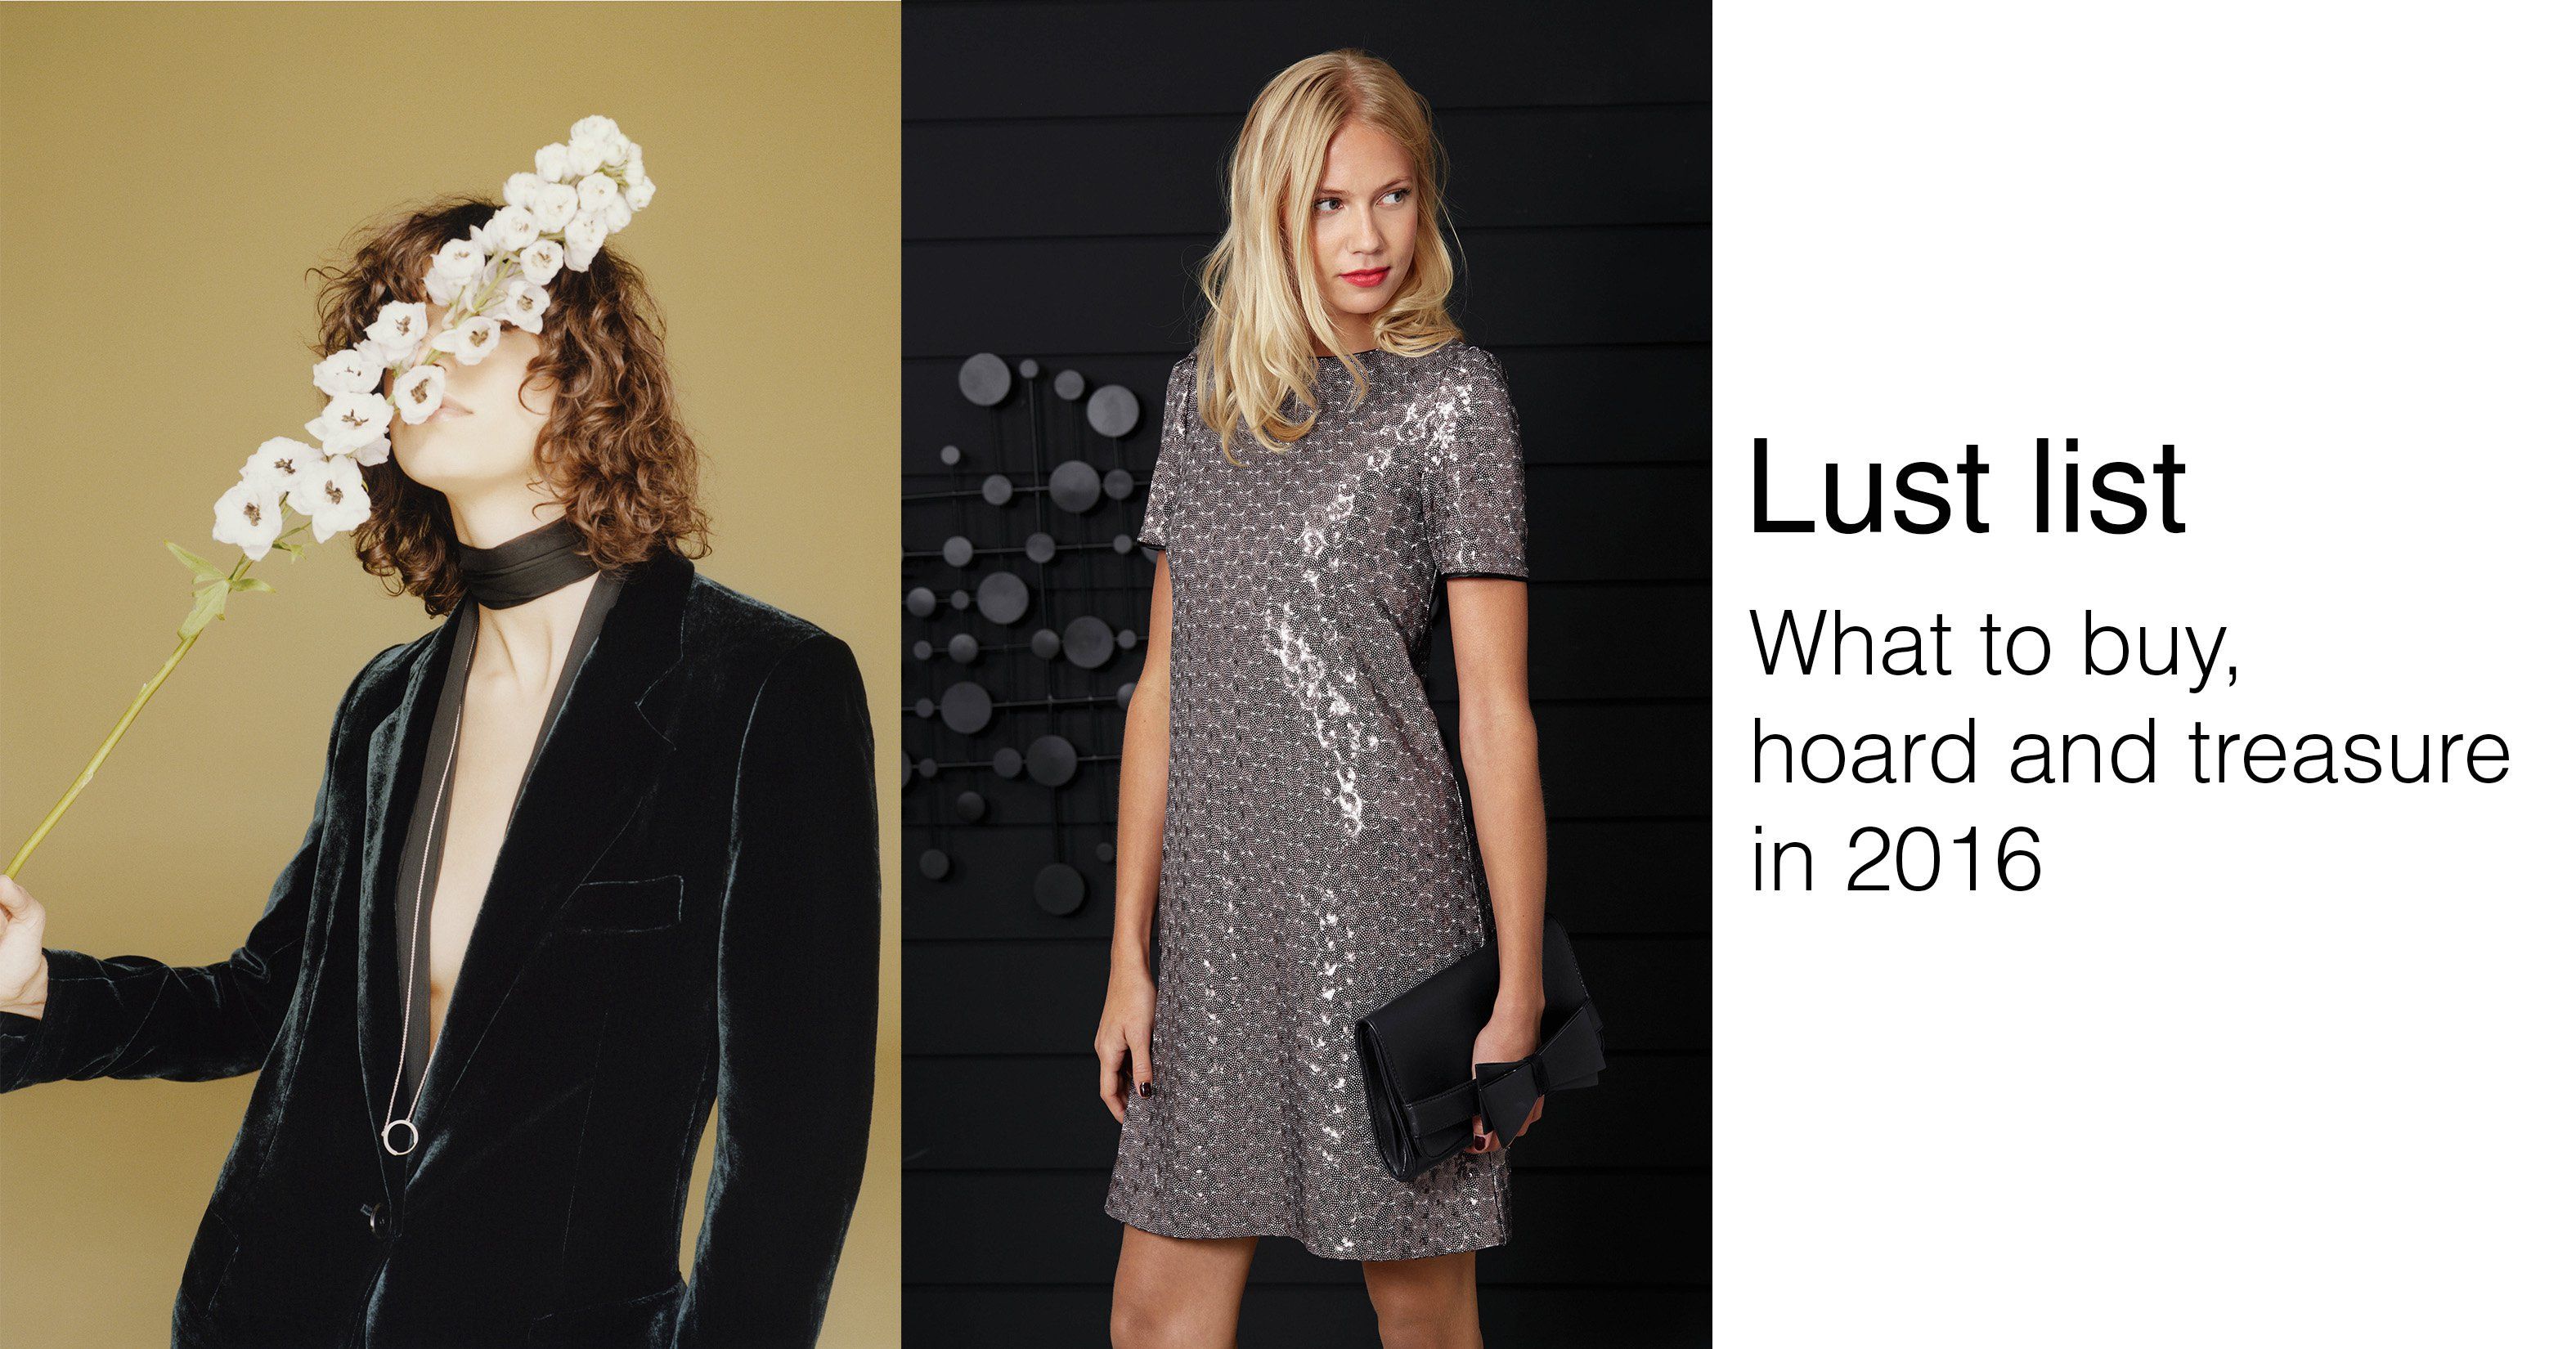 lust_list_what_to_buy_trends_2016_featured_fashion_style